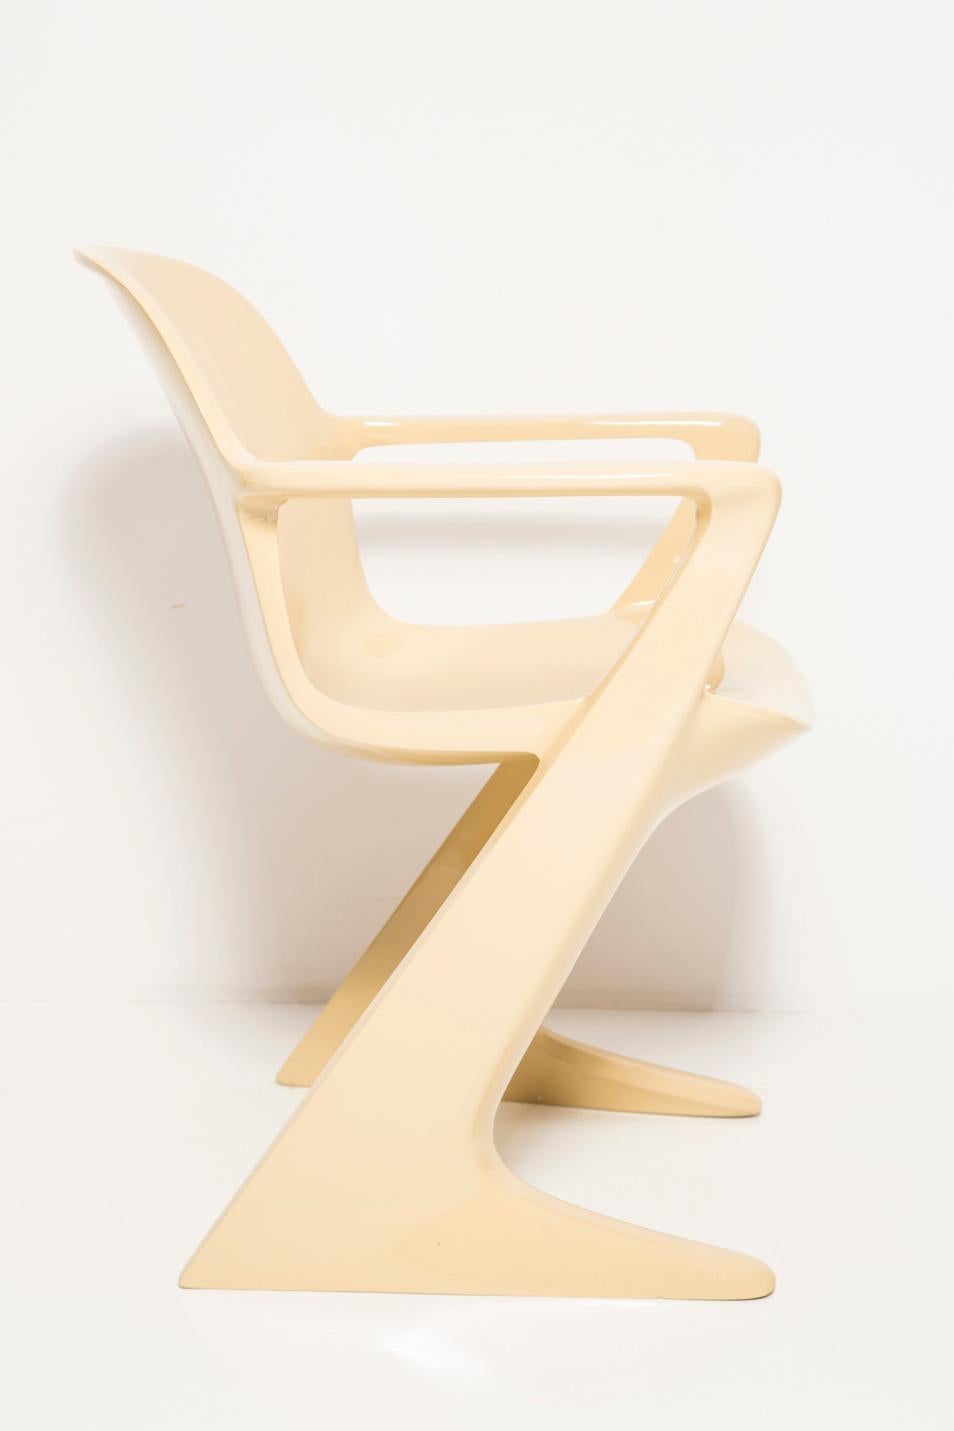 20th Century Midcentury Beige Kangaroo Chair Designed by Ernst Moeckl, Germany, 1968 For Sale